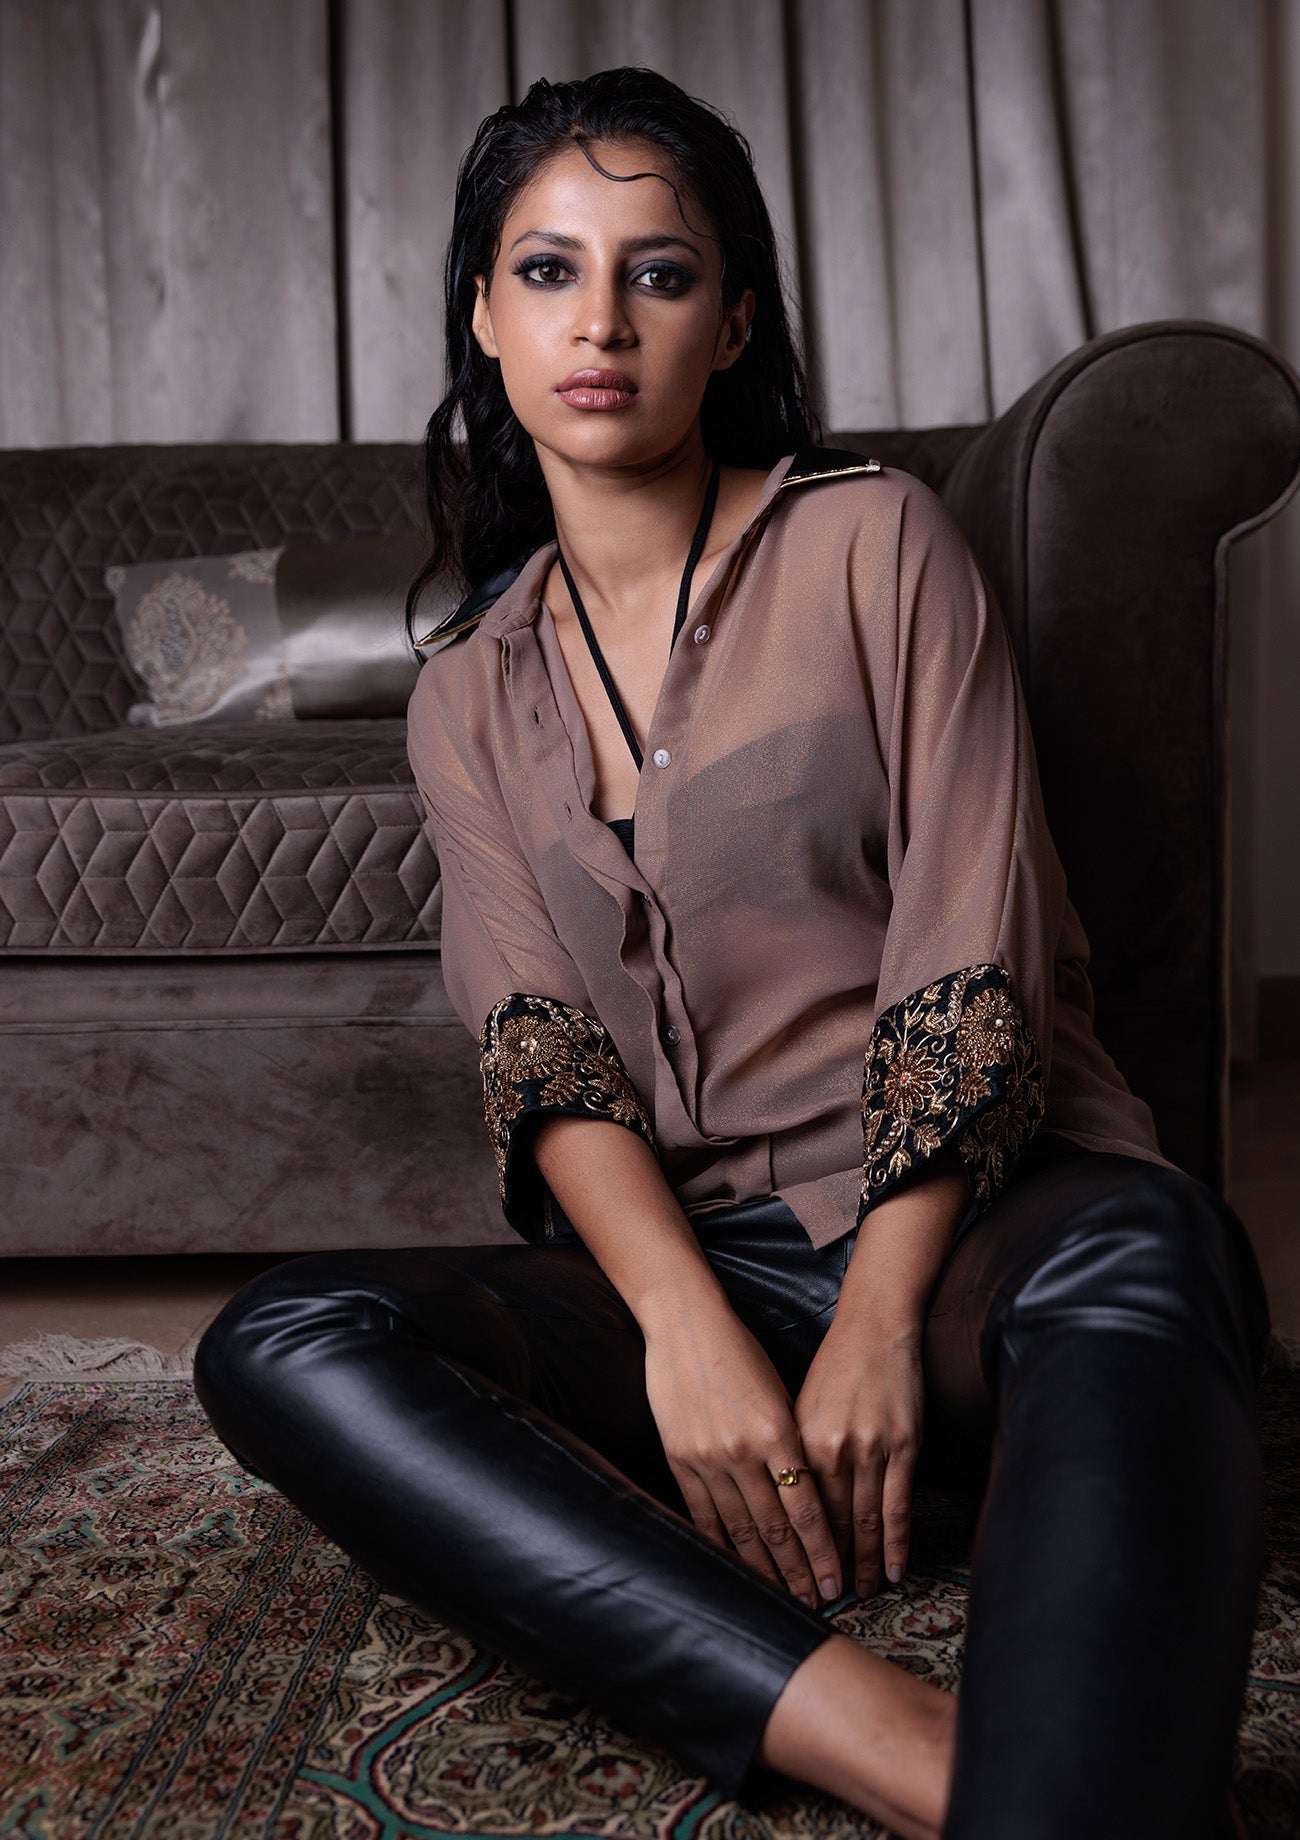 Shimmer Beige Poncho Shirt with Black Collar And Embroidered Cuffs